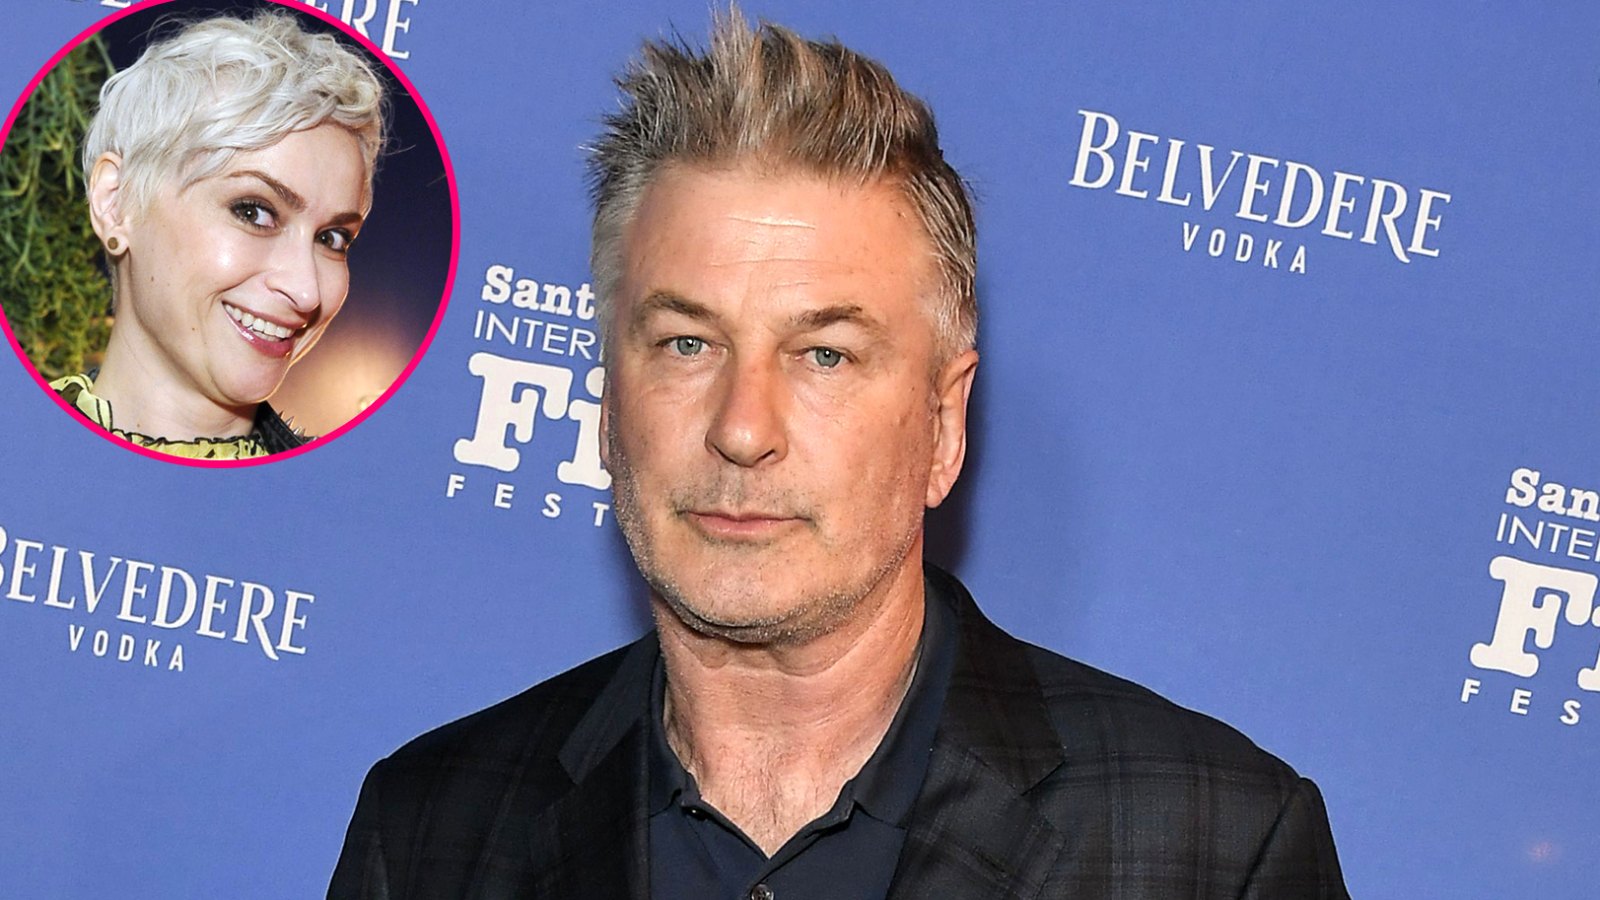 Alec Baldwin Speaks on Camera for 1st Time About Halyna Hutchins' Death: 'She Was My Friend'